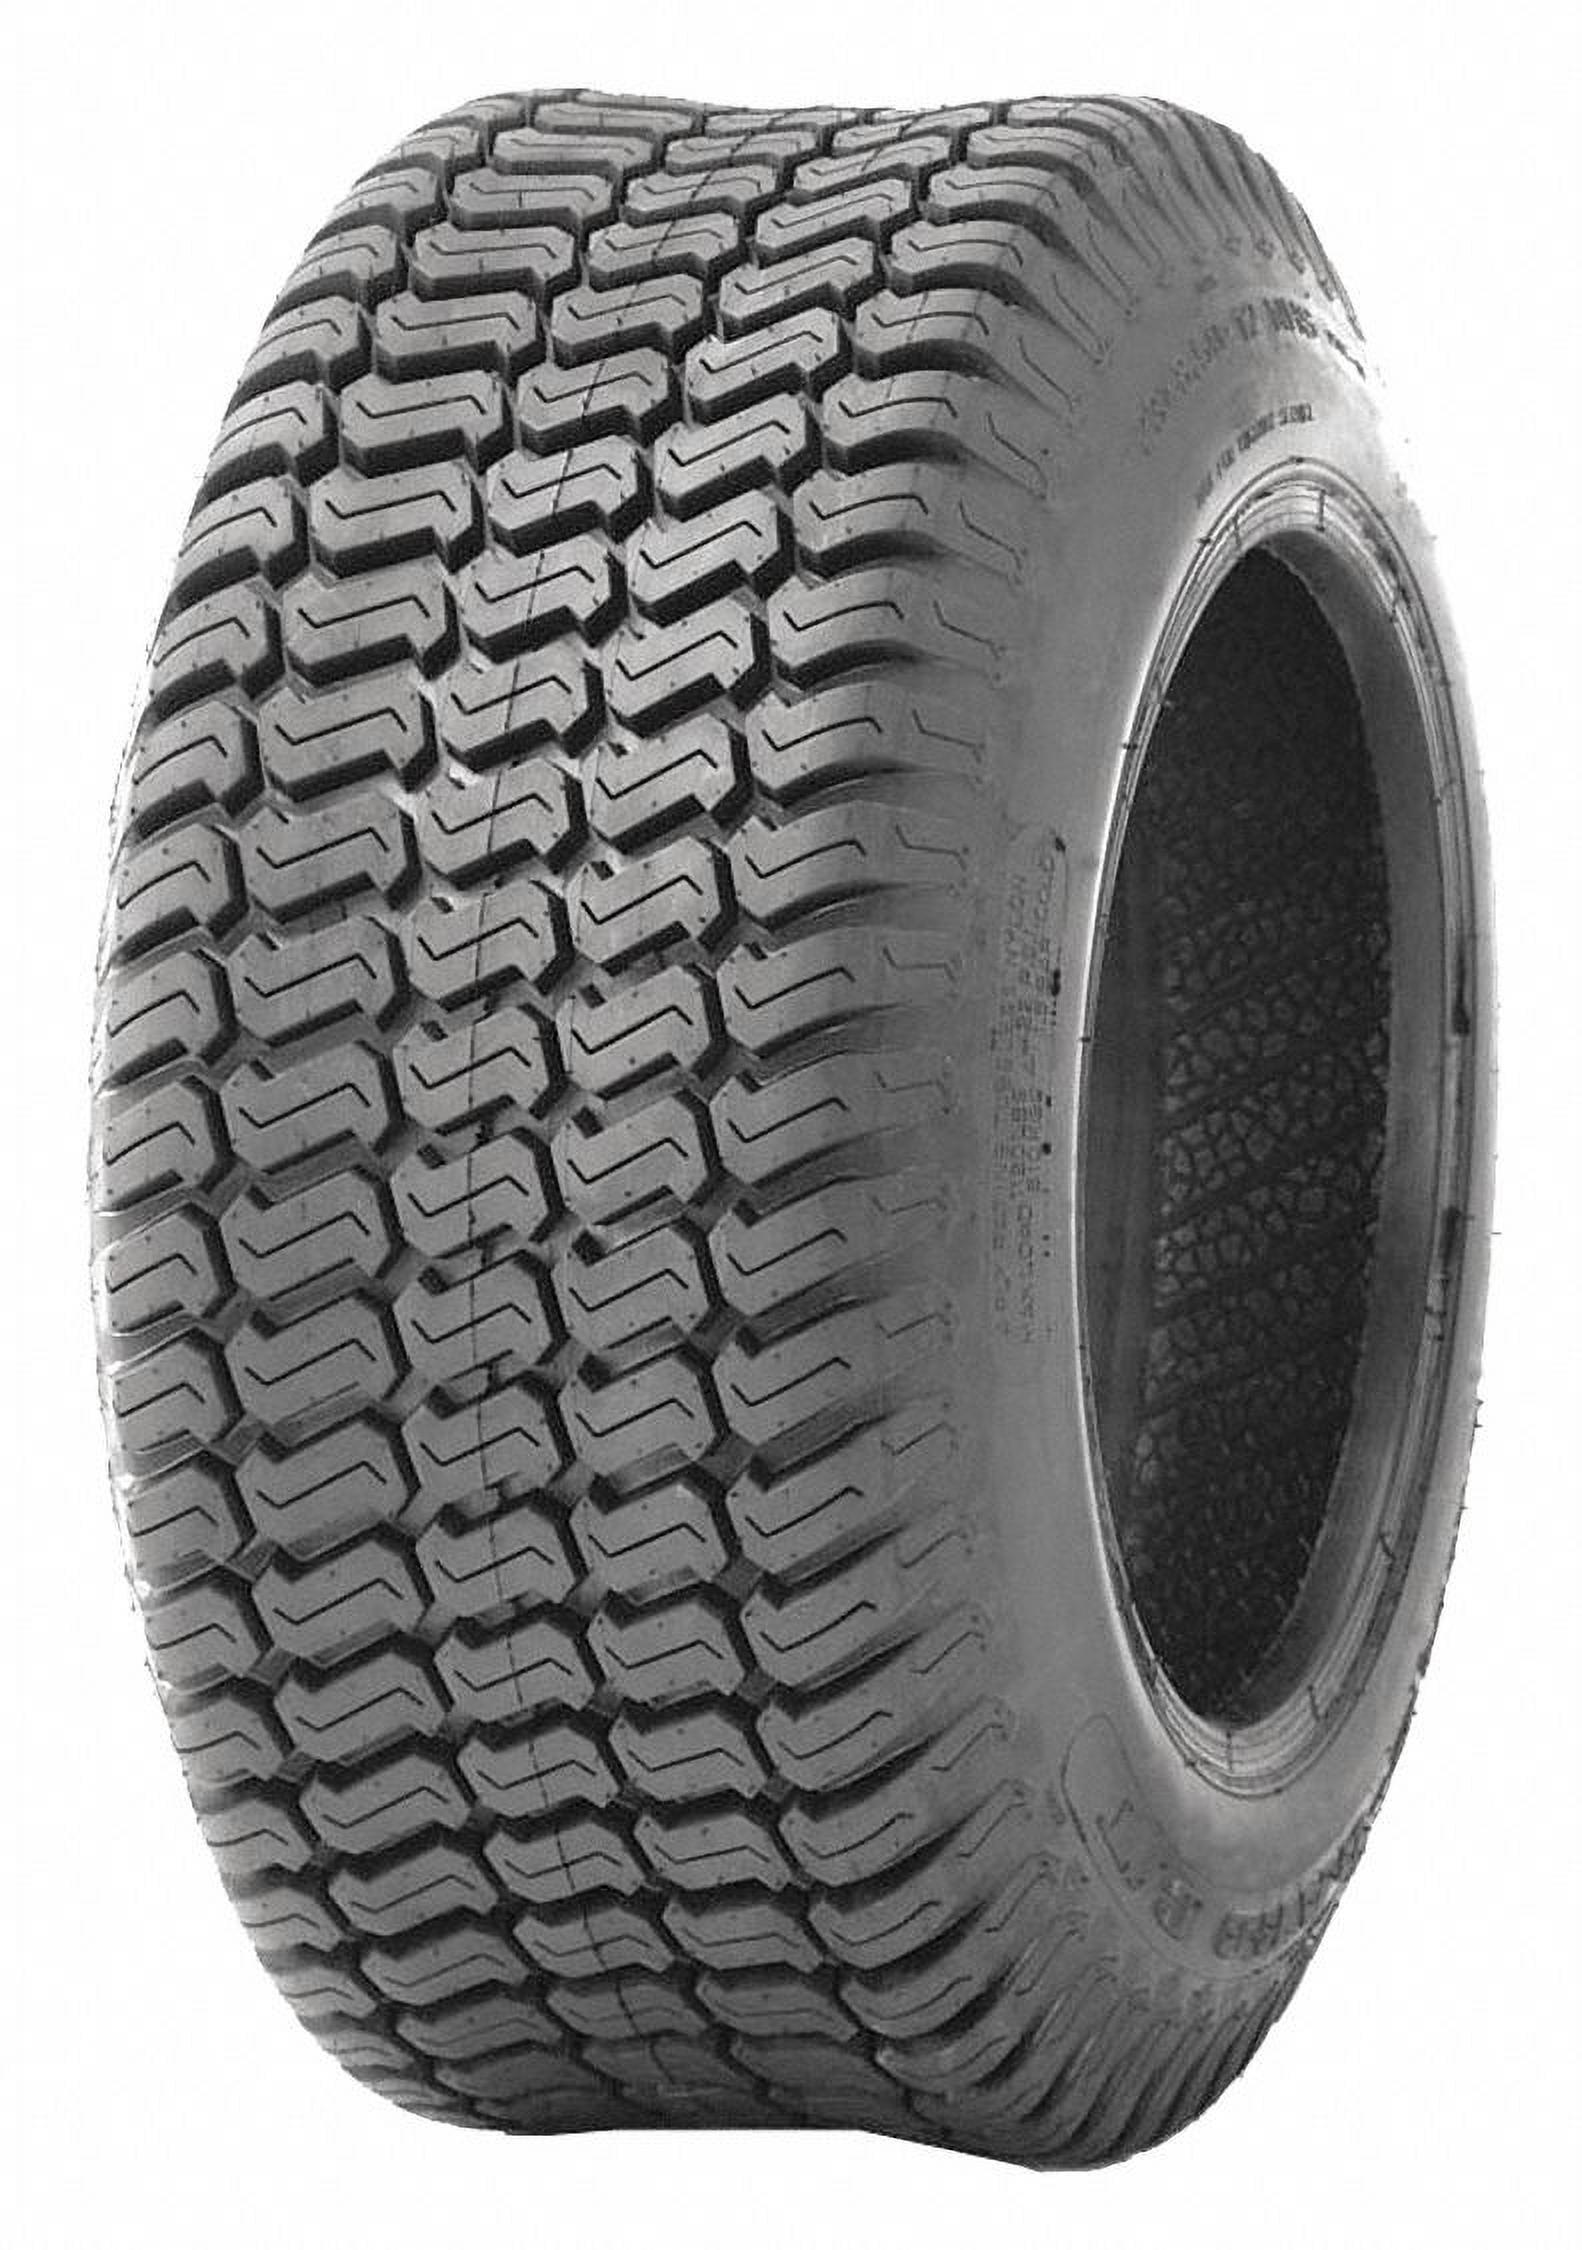 2 23x10.50-12 23/10.50-12 Riding Lawn Mower Garden Tractor Turf TIRES P332 4ply